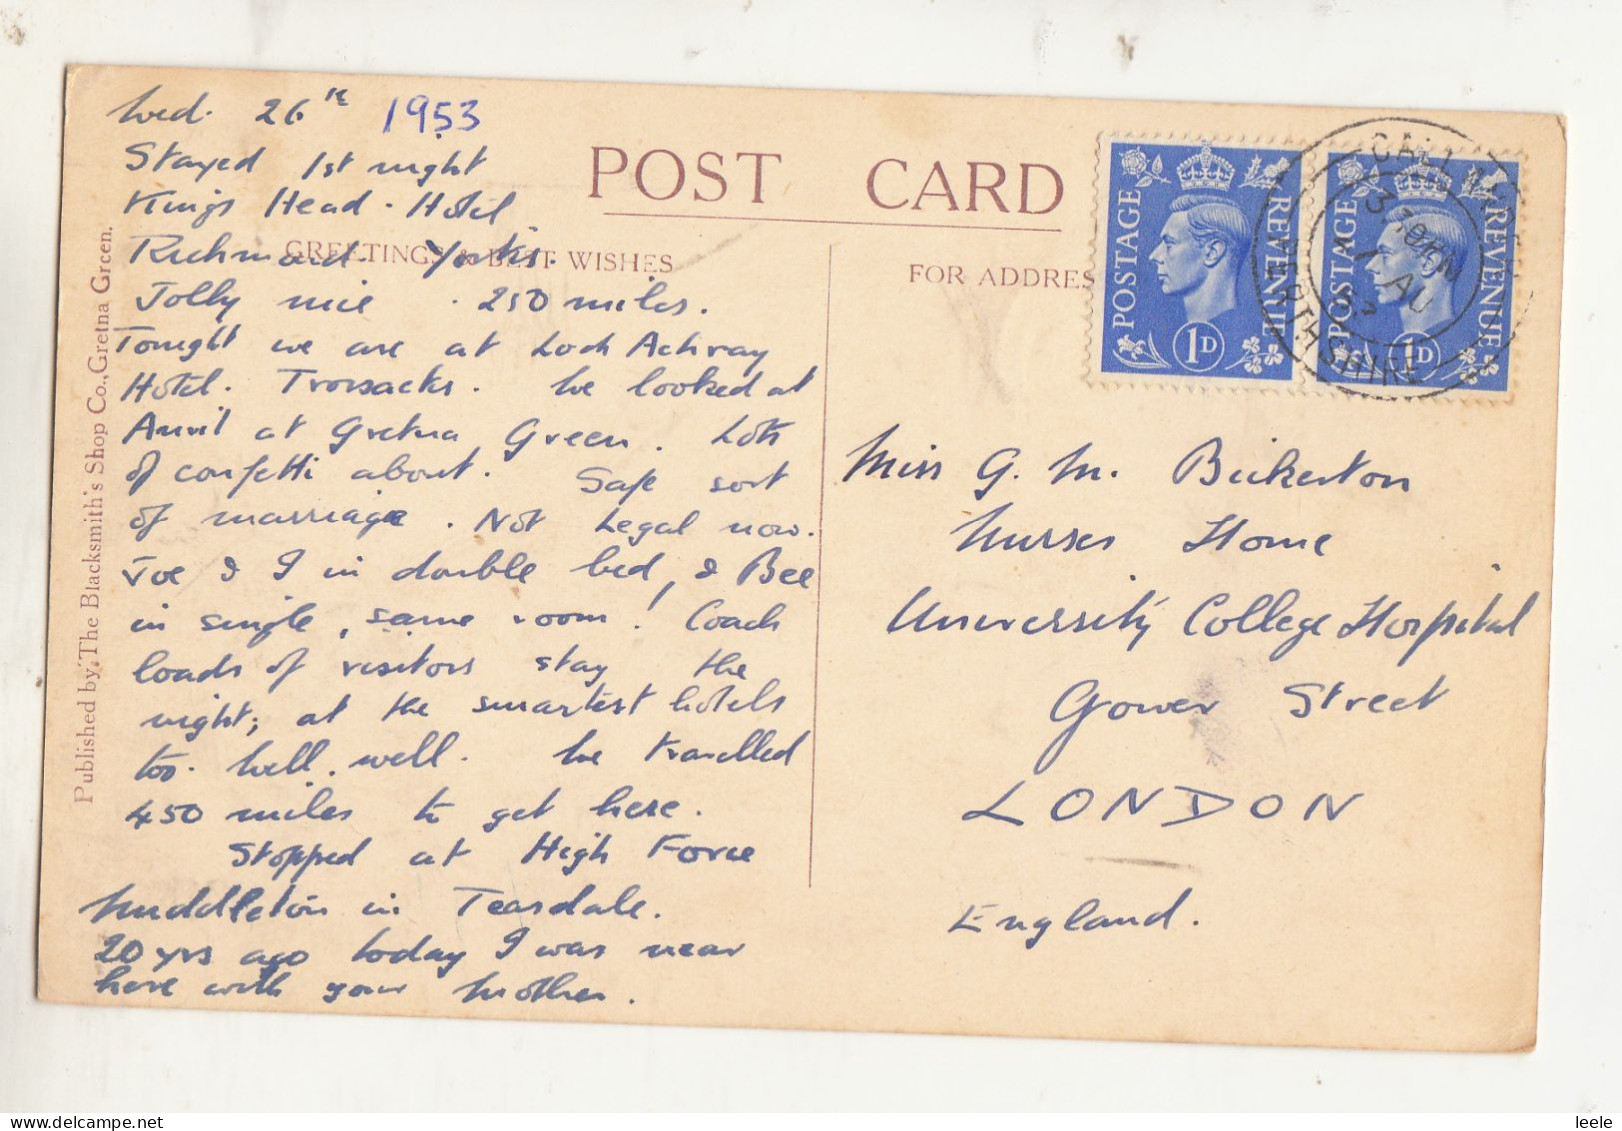 DB13. Vintage Postcard. Pursued. Couple On Way To Gretna Green. - Dumfriesshire